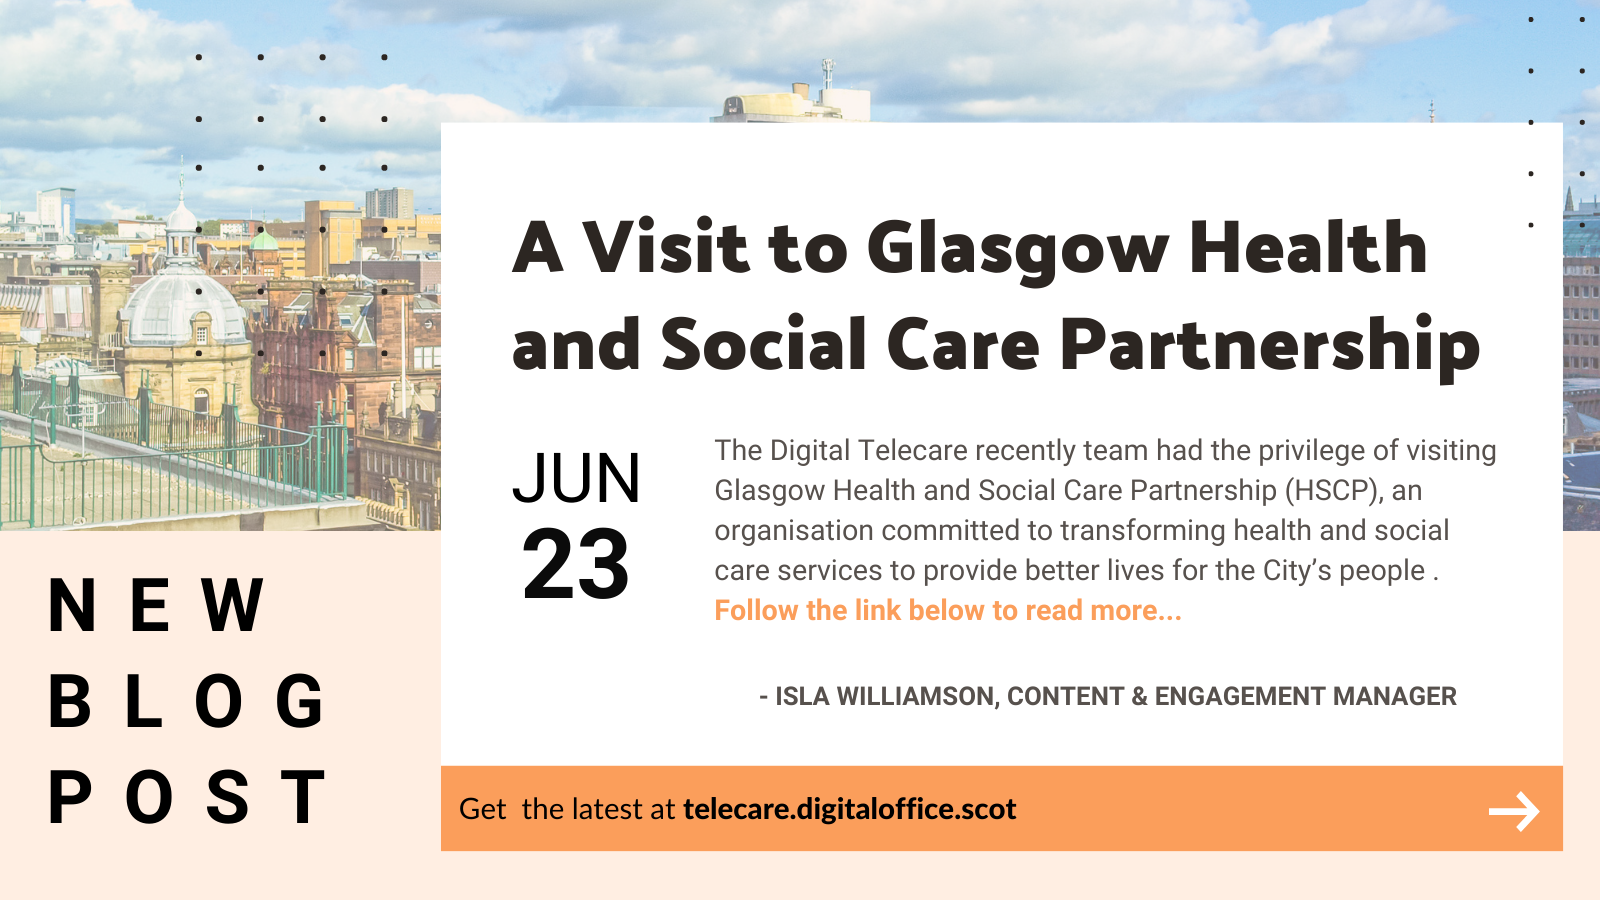 Blog: A Visit to Glasgow Health and Social Care Partnership